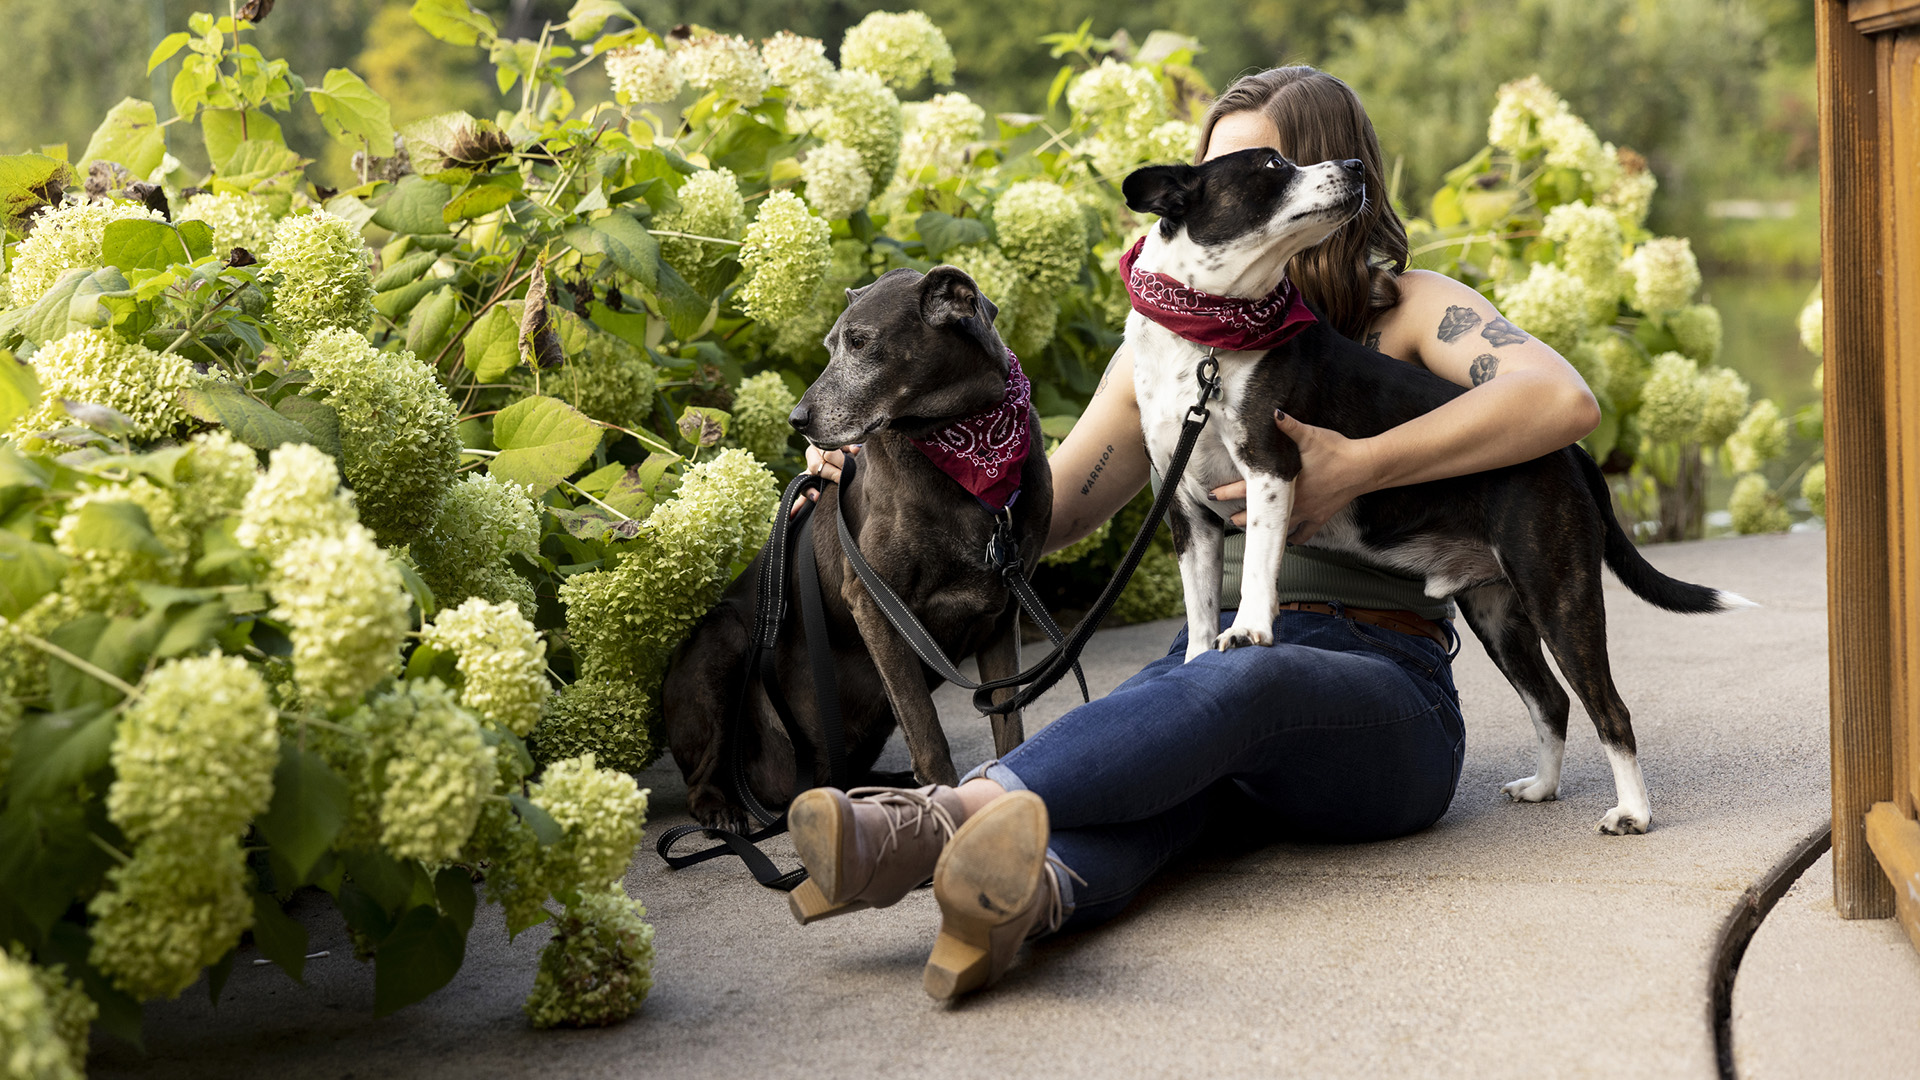 A woman sits on a concrete walkway and holds the front of a standing dog in her left arm while placing her right hand on a seated dog, with multiple flowering bushes in the background.